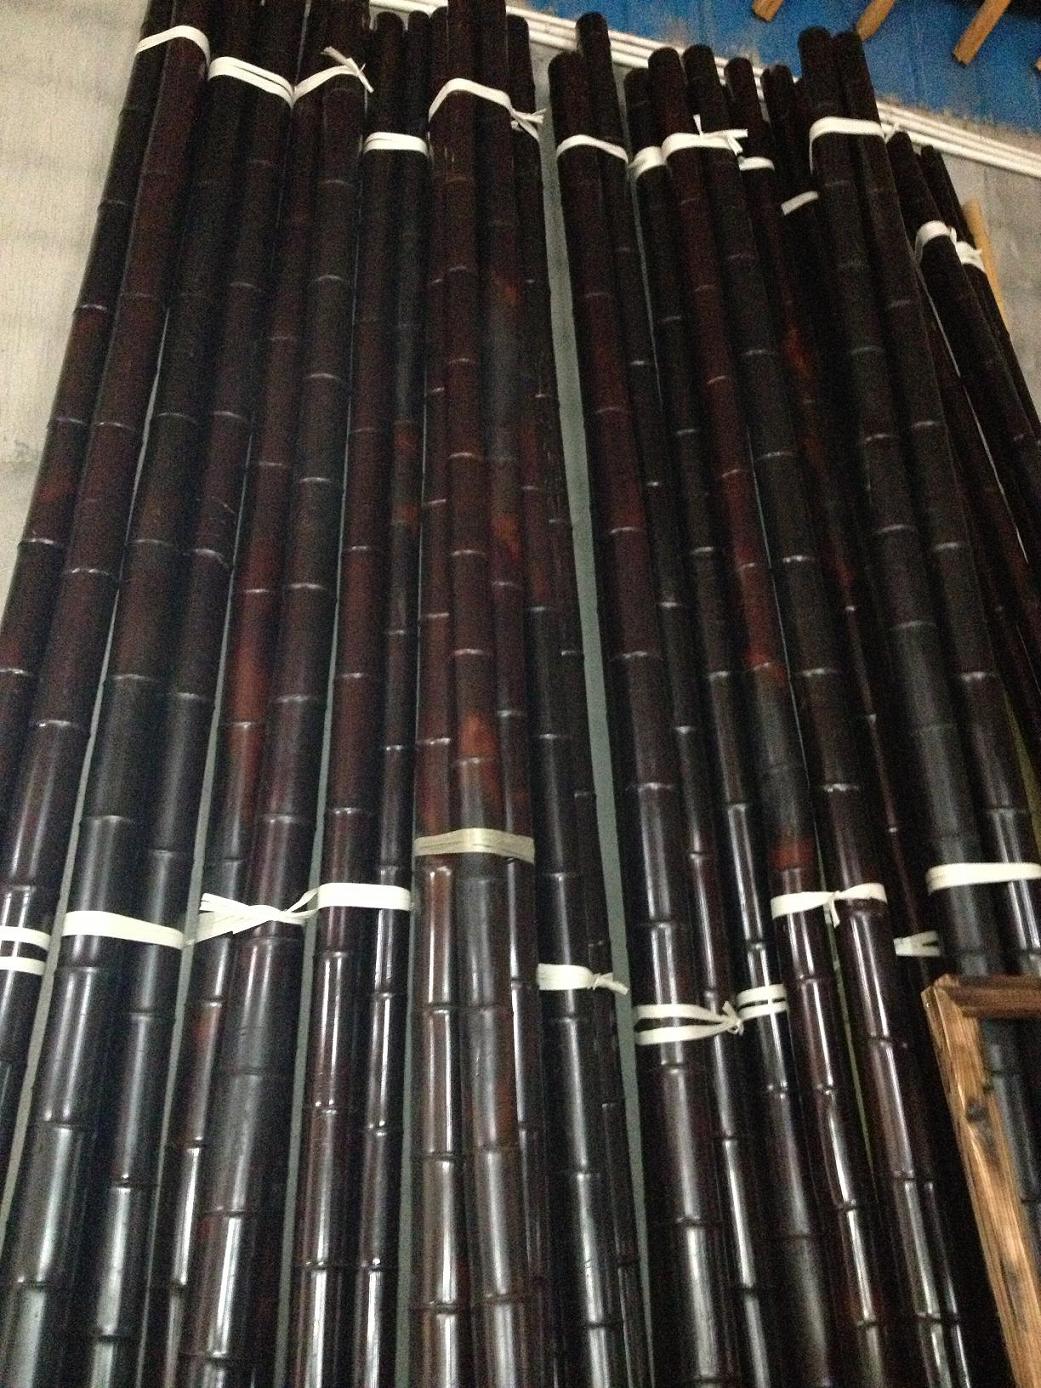 Dyed bamboo poles